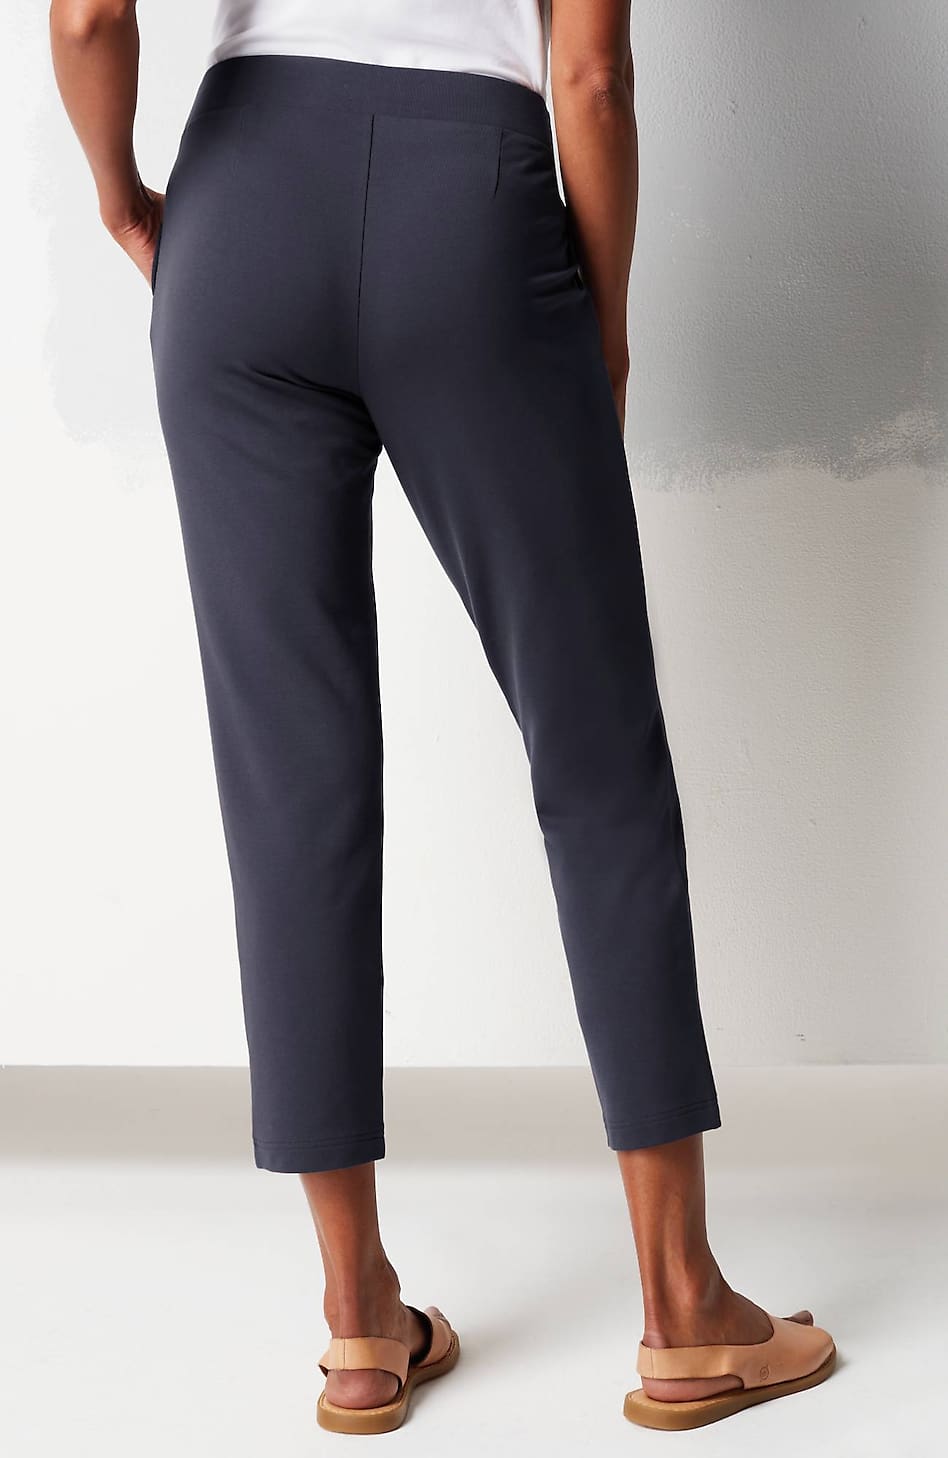 Lululemon Here To There Pant Cadet Navy Blue Stripe Trousers